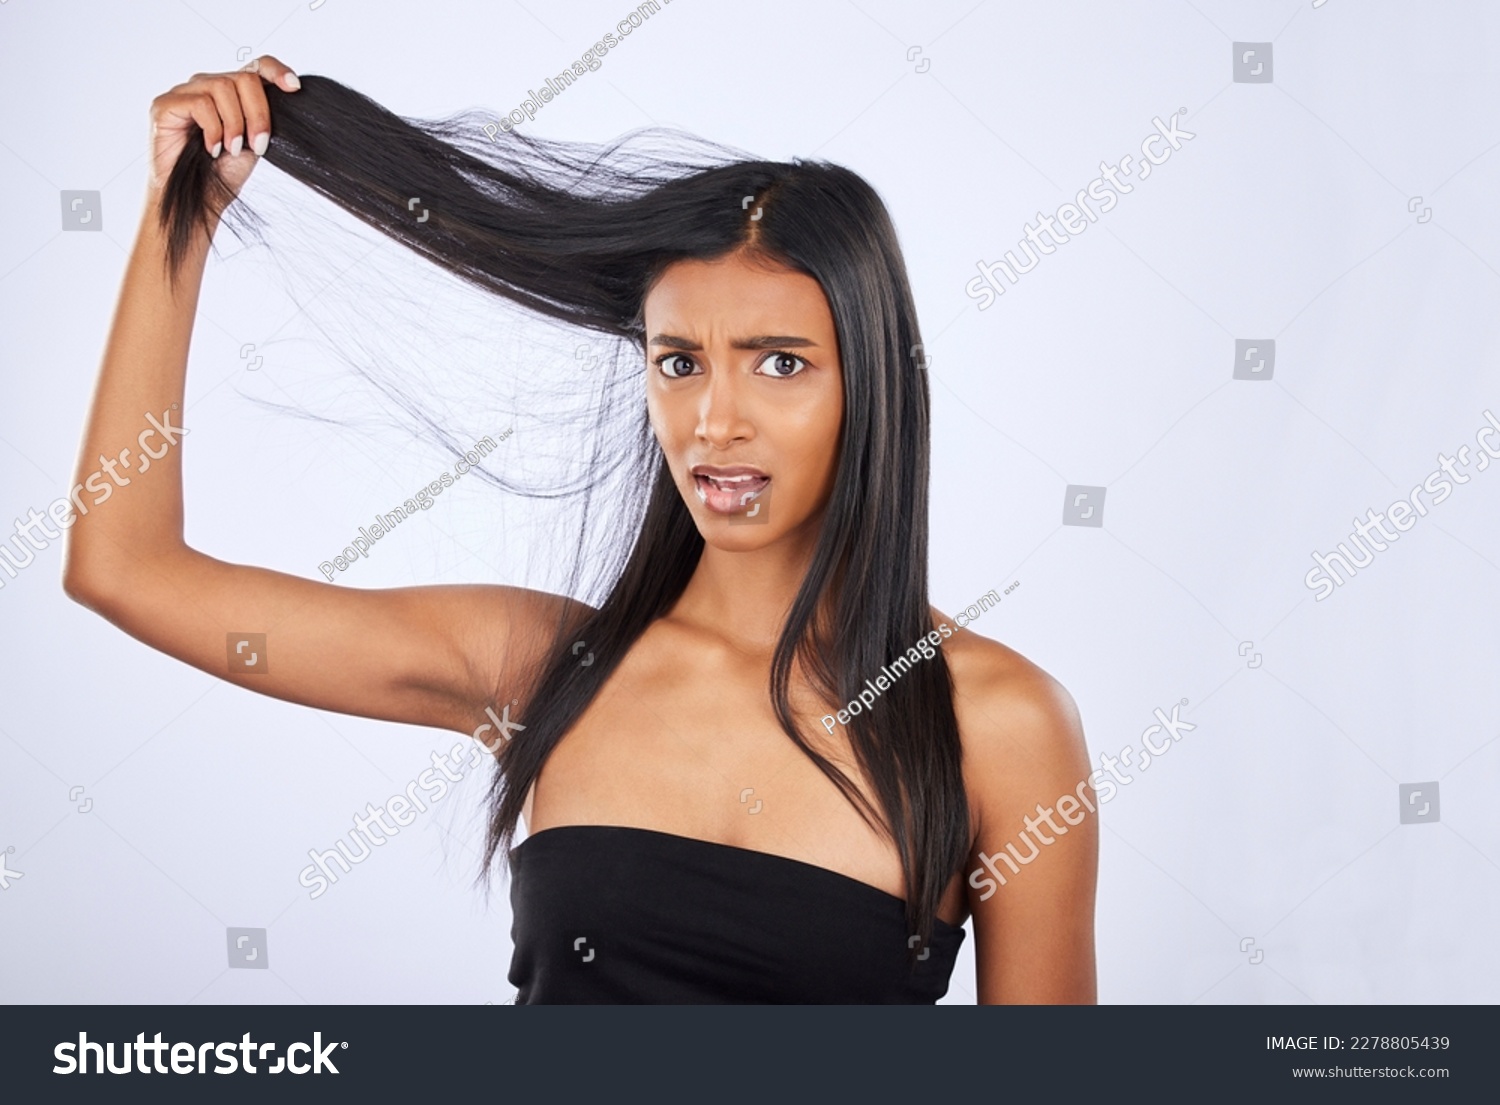 Hair damage, breakage and portrait of a frustrated woman isolated on a white background in studio. Bad, unhappy and an Indian girl sad about split ends, tangled hairstyle and frizzy haircare #2278805439